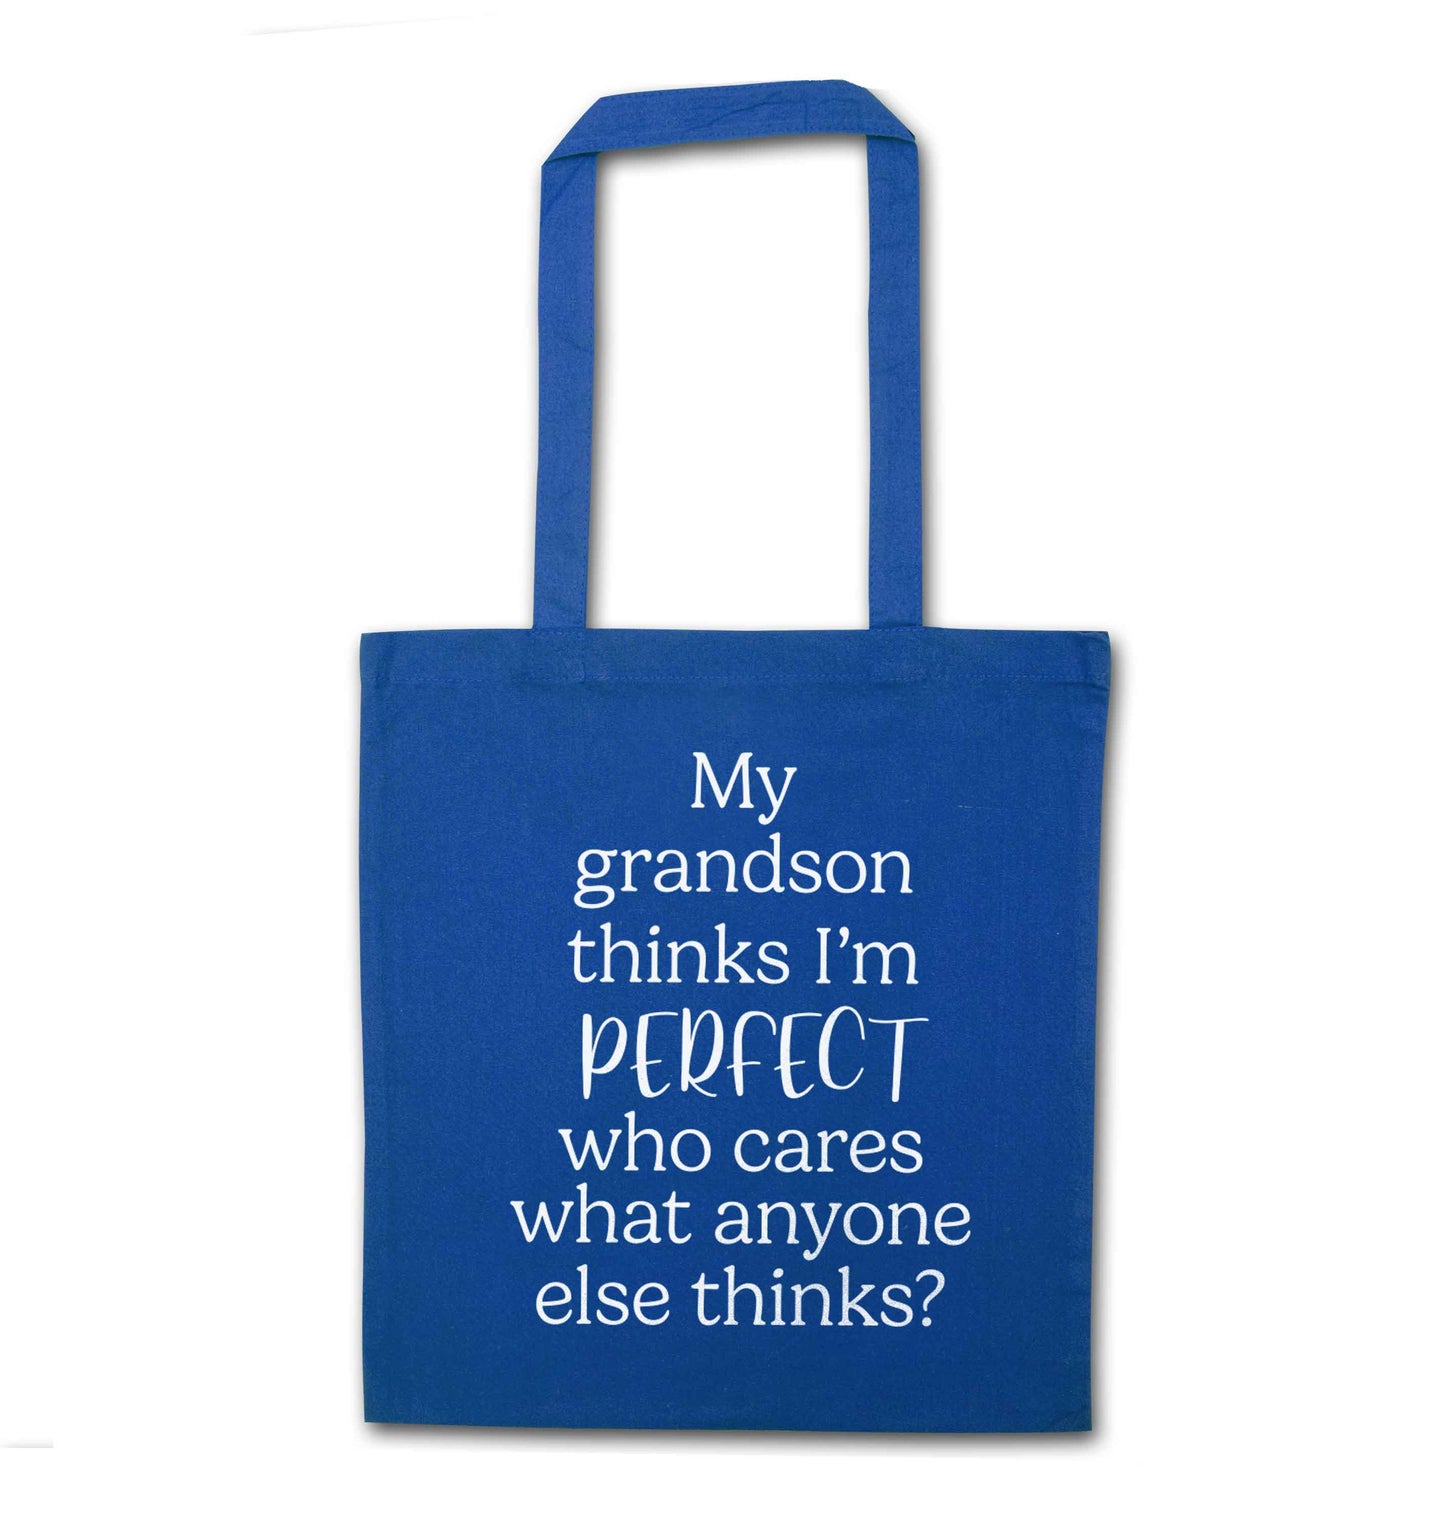 My Grandson thinks I'm perfect who cares what anyone else thinks? blue tote bag